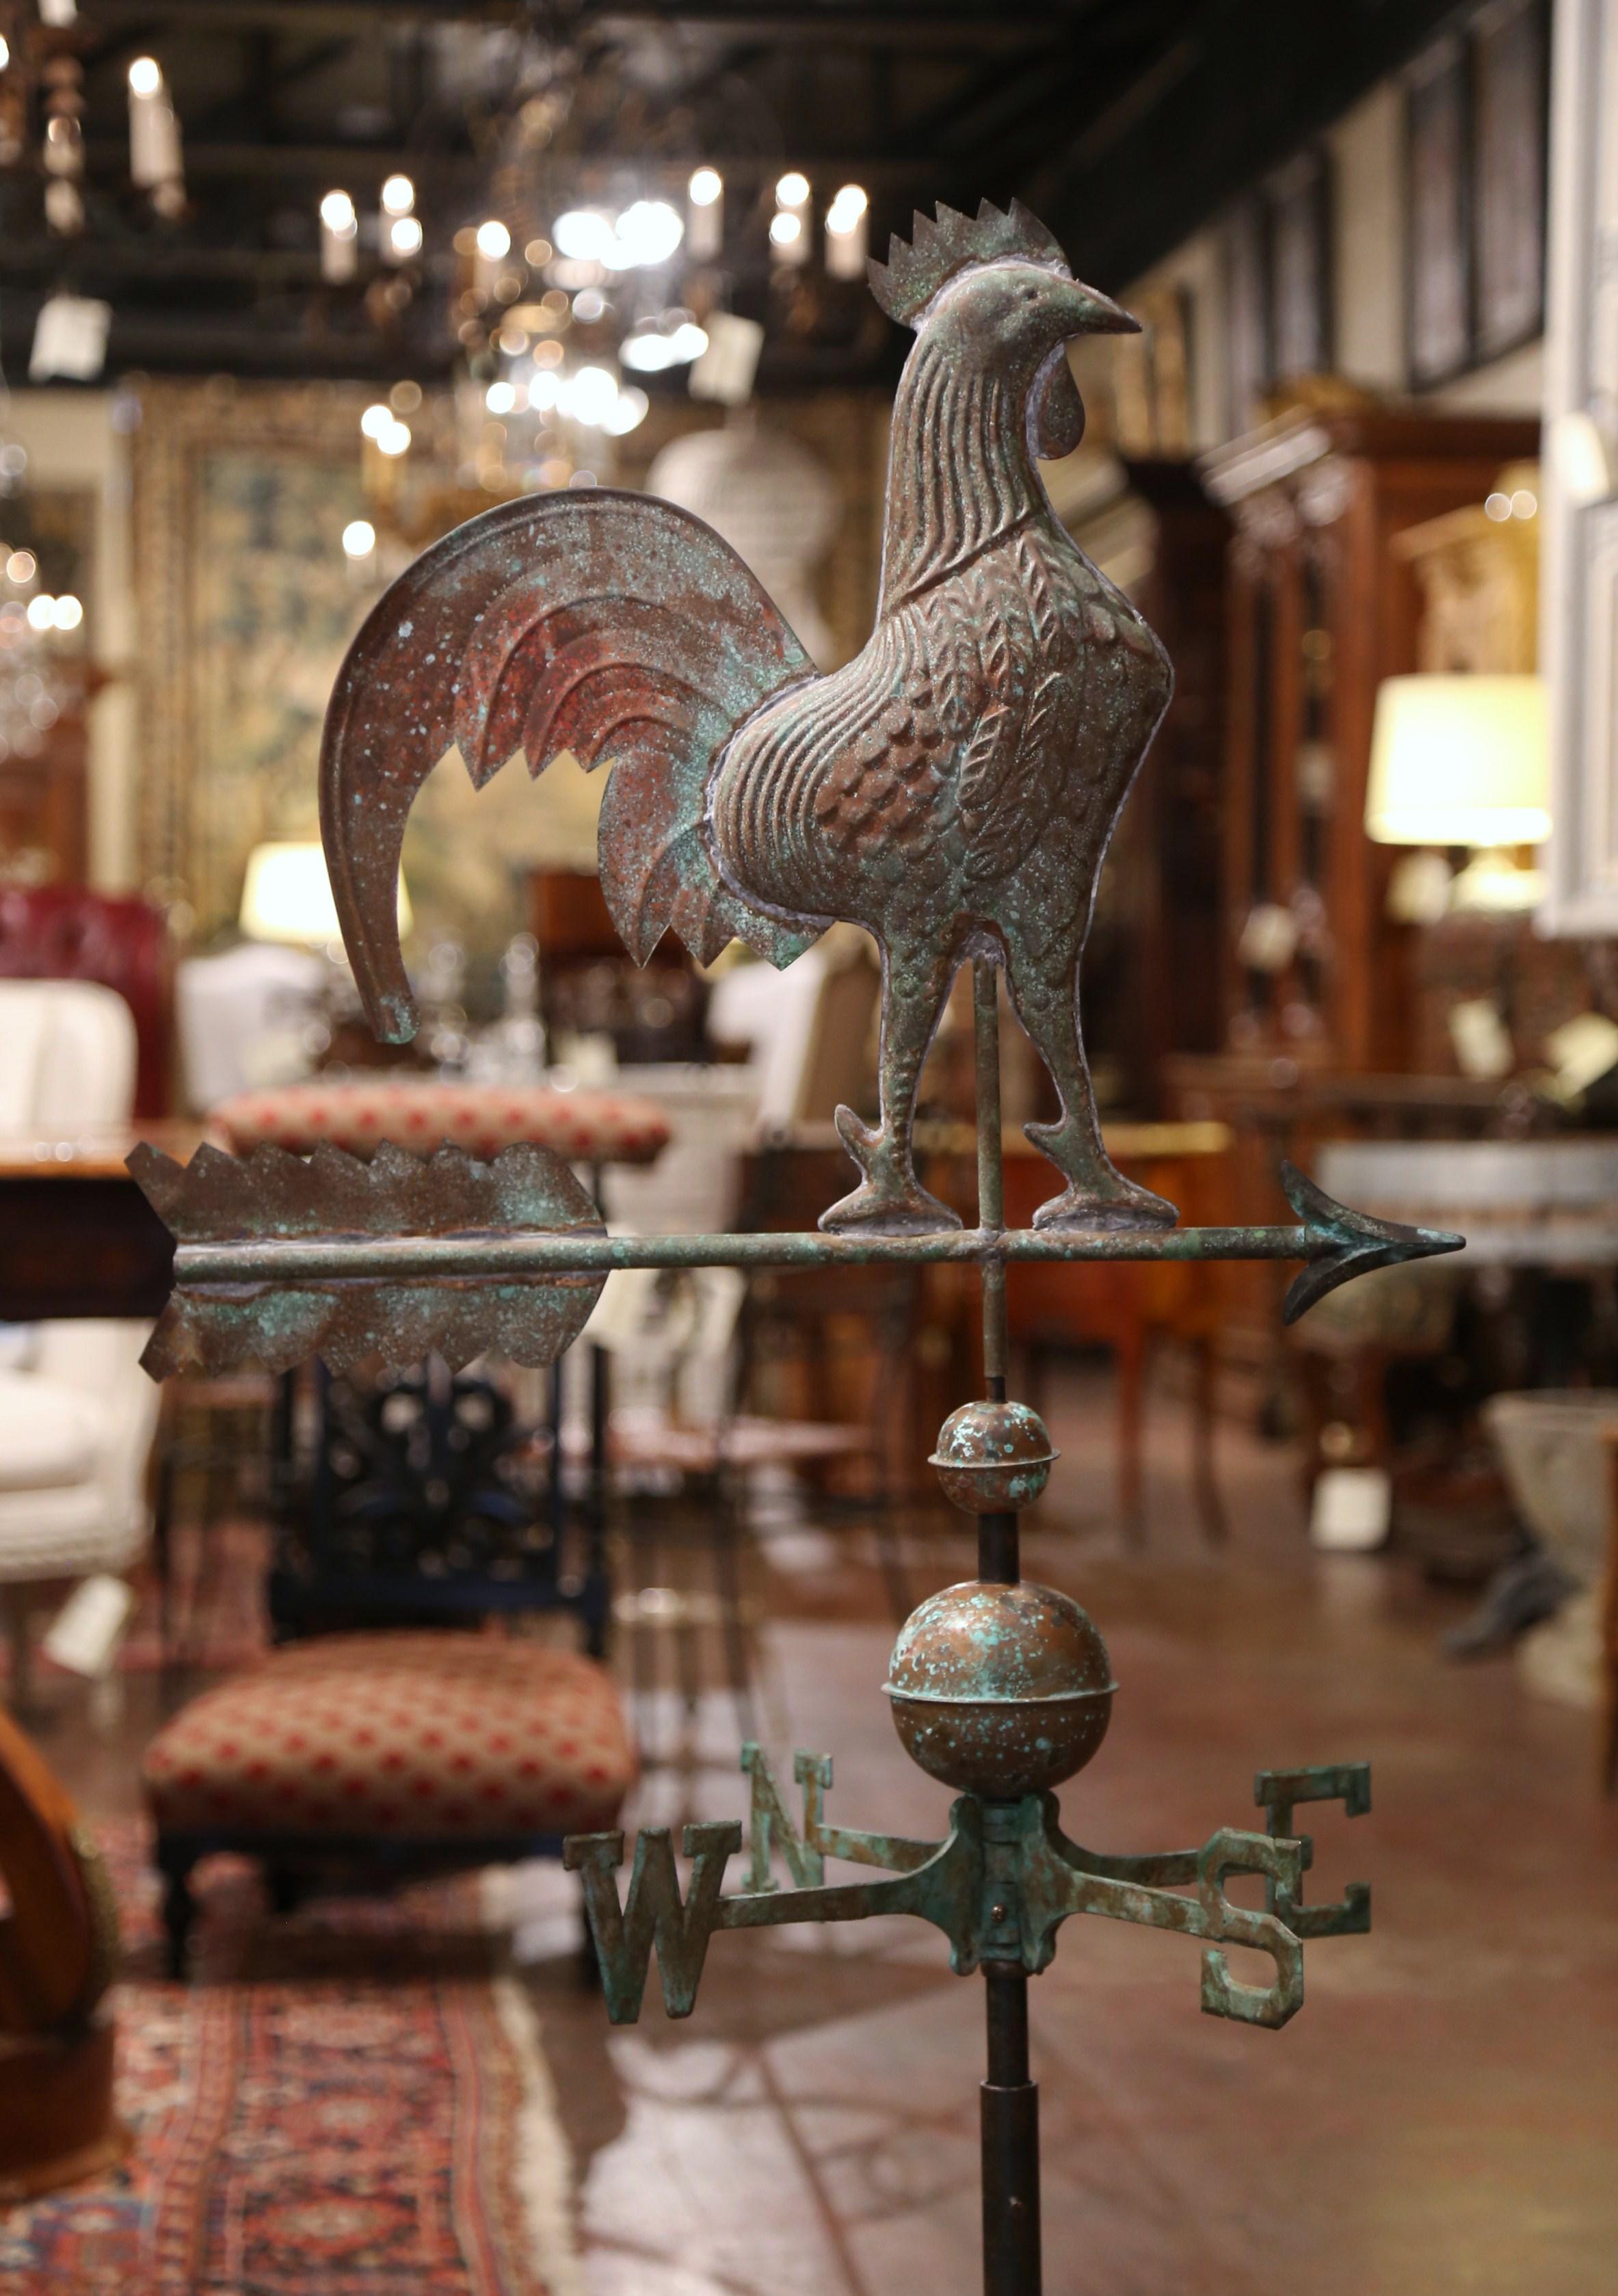 This elegant tole weather vane was created in Normandy, France, circa 1860. The traditional weather vane features a Classic swivel French chanticleer rooster standing on an arrow; below, the four points of the compass which swivel as well according